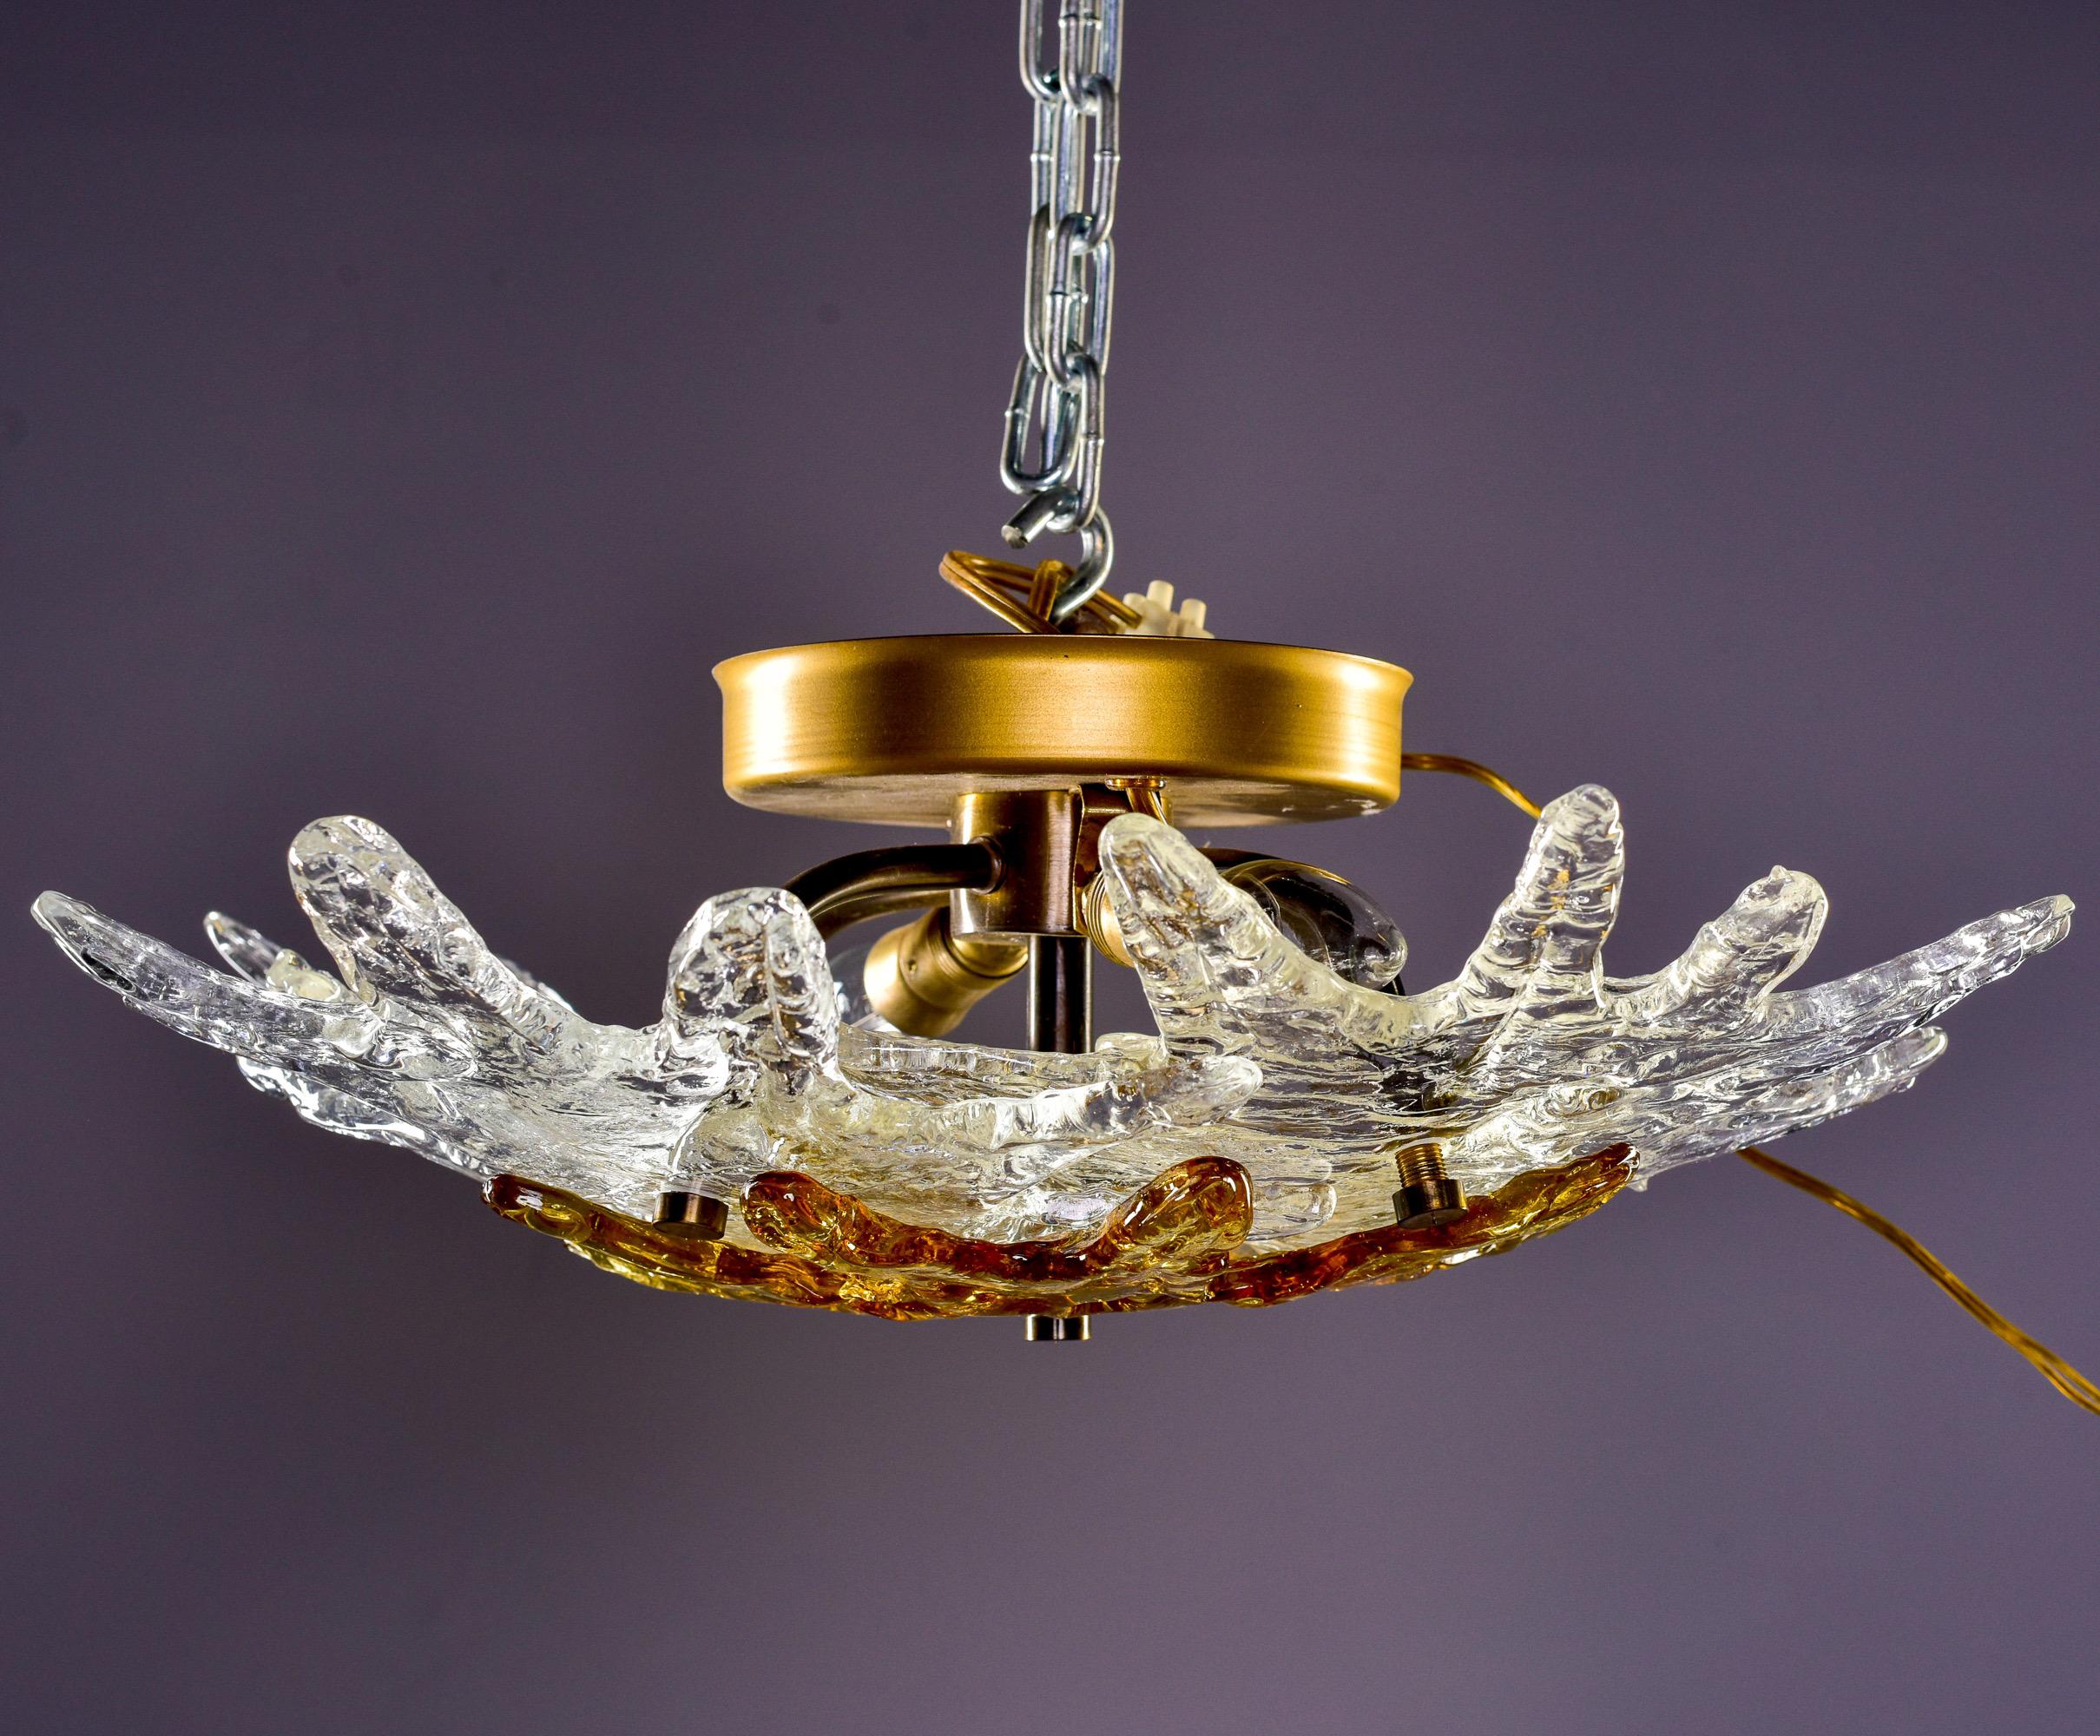 Circa 1960s flush light fixture by Italian maker Zero Quattro has two candelabra sockets covered with four sculptural stars in clear, heavy glass with an amber center star. New wiring for US electrical standards.